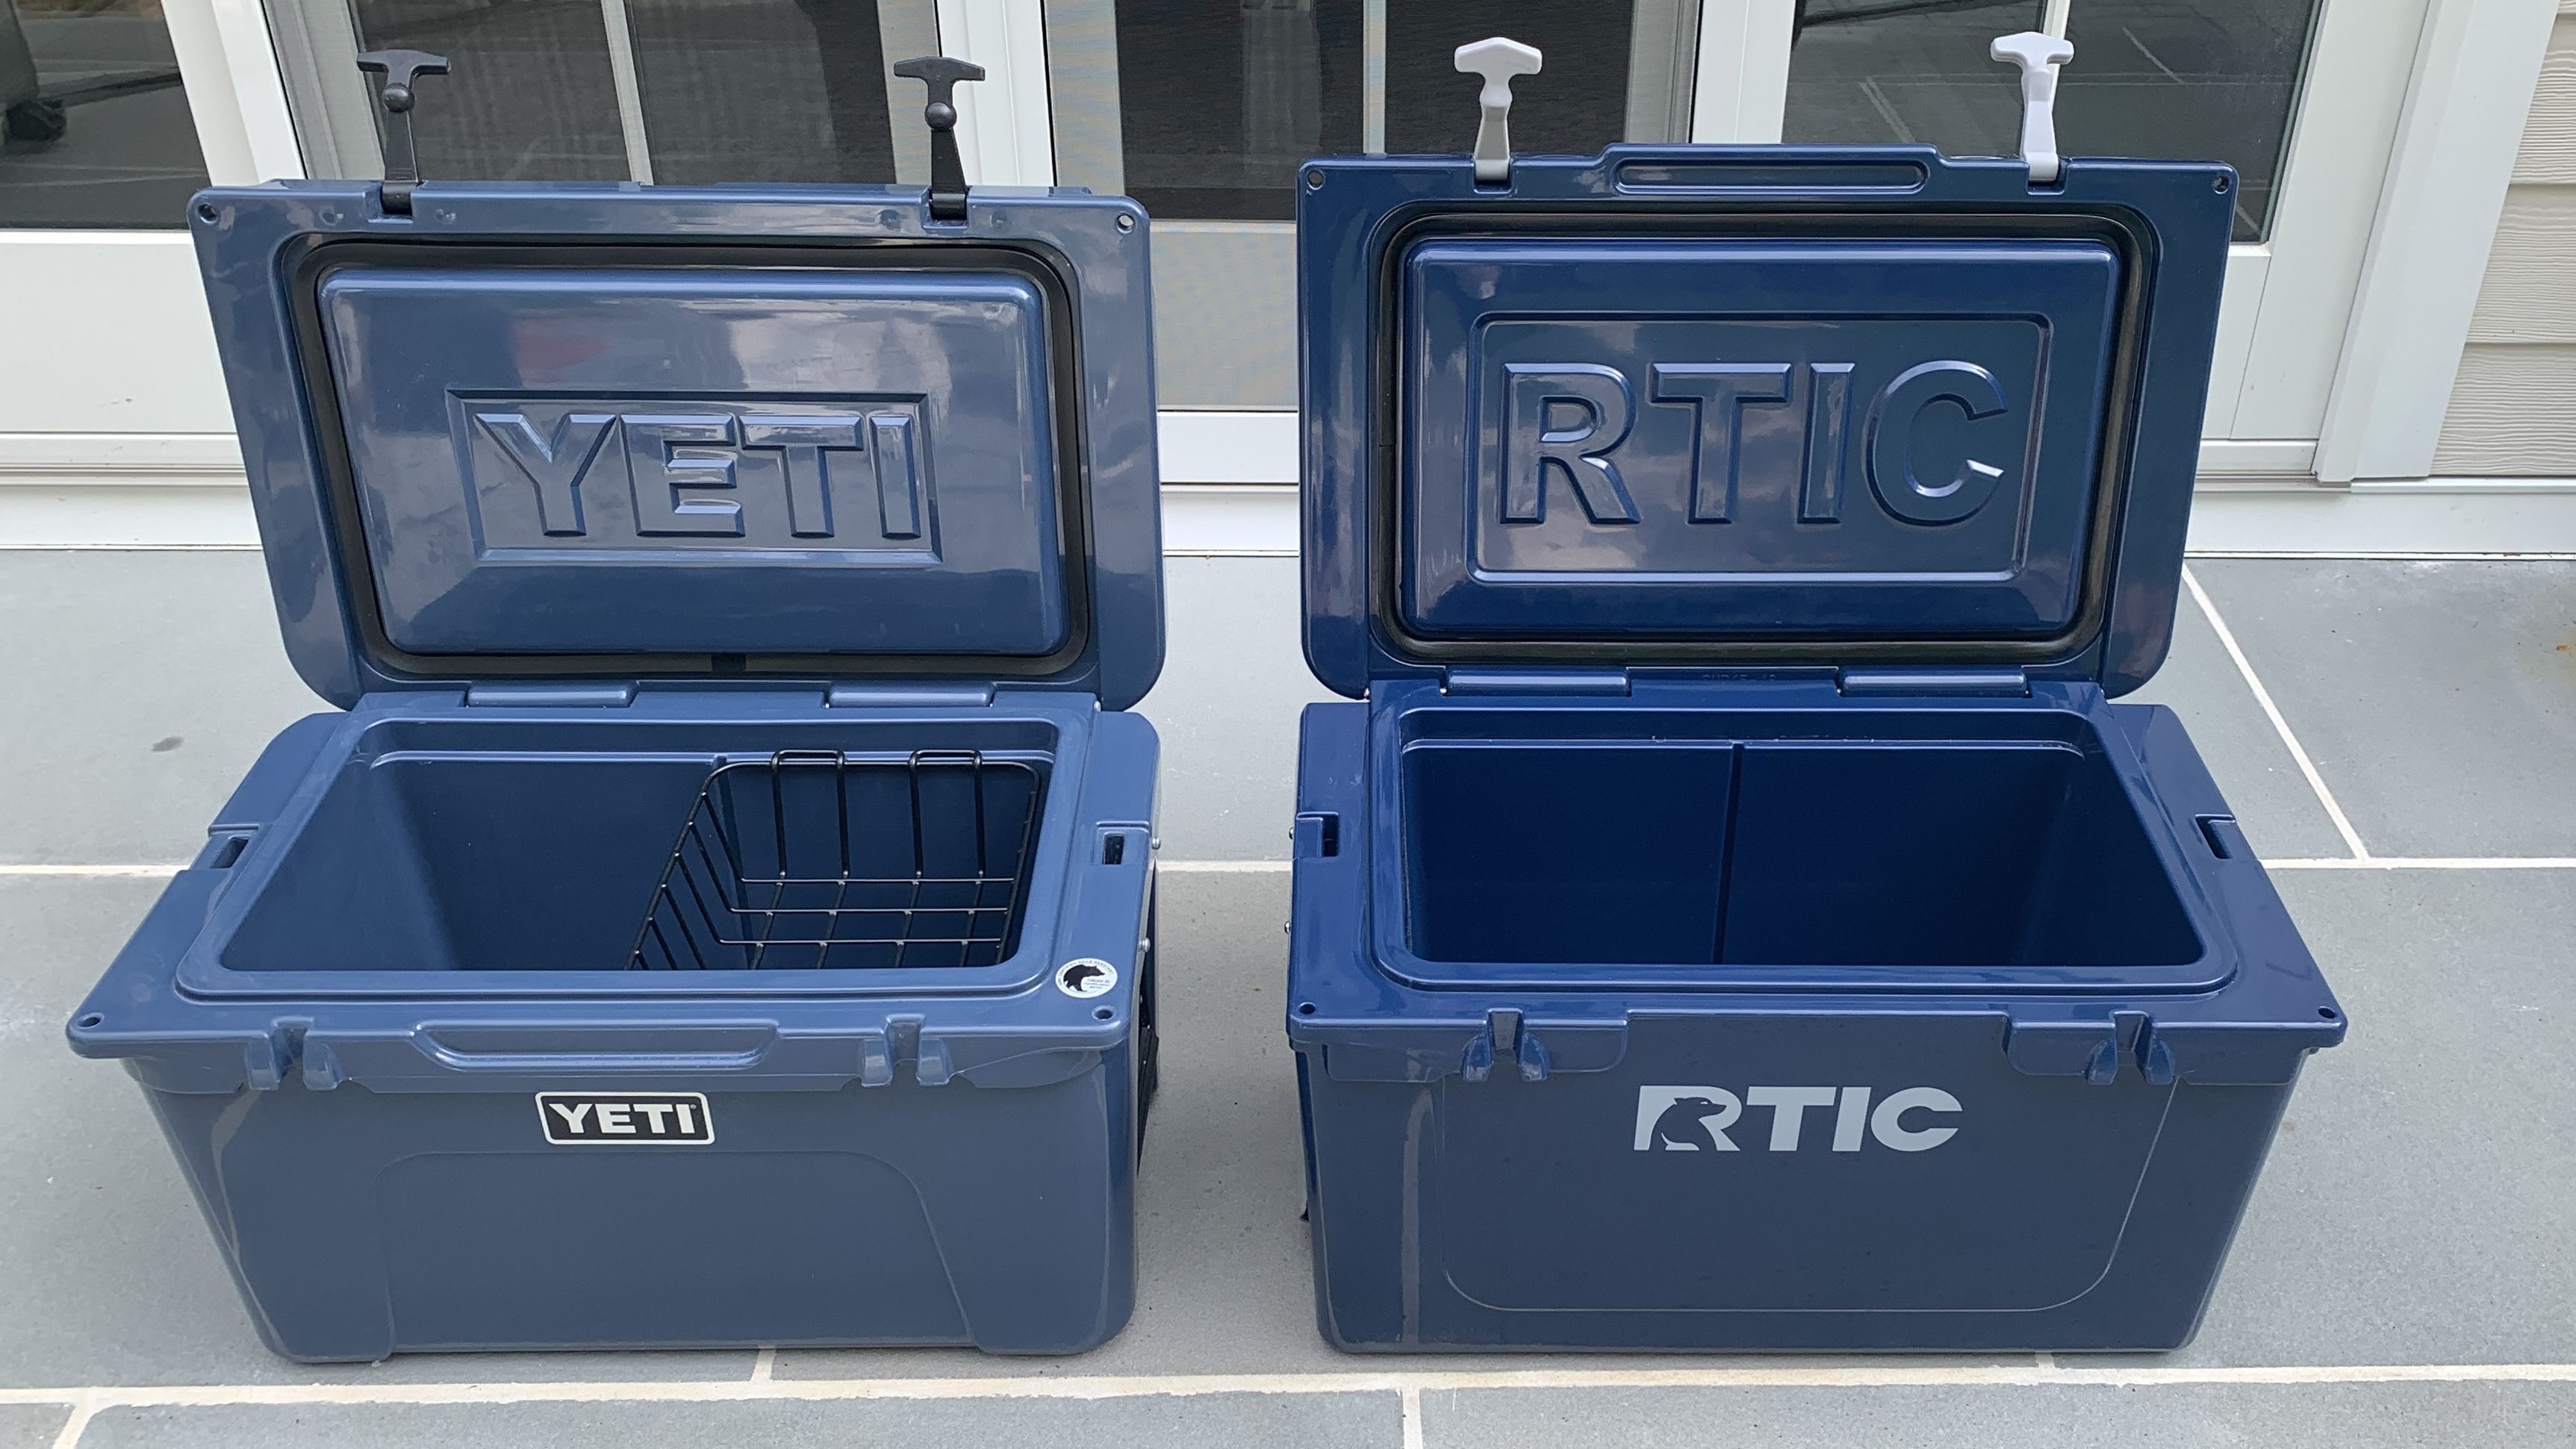 Yeti Tundra 45 Cooler Review 2020